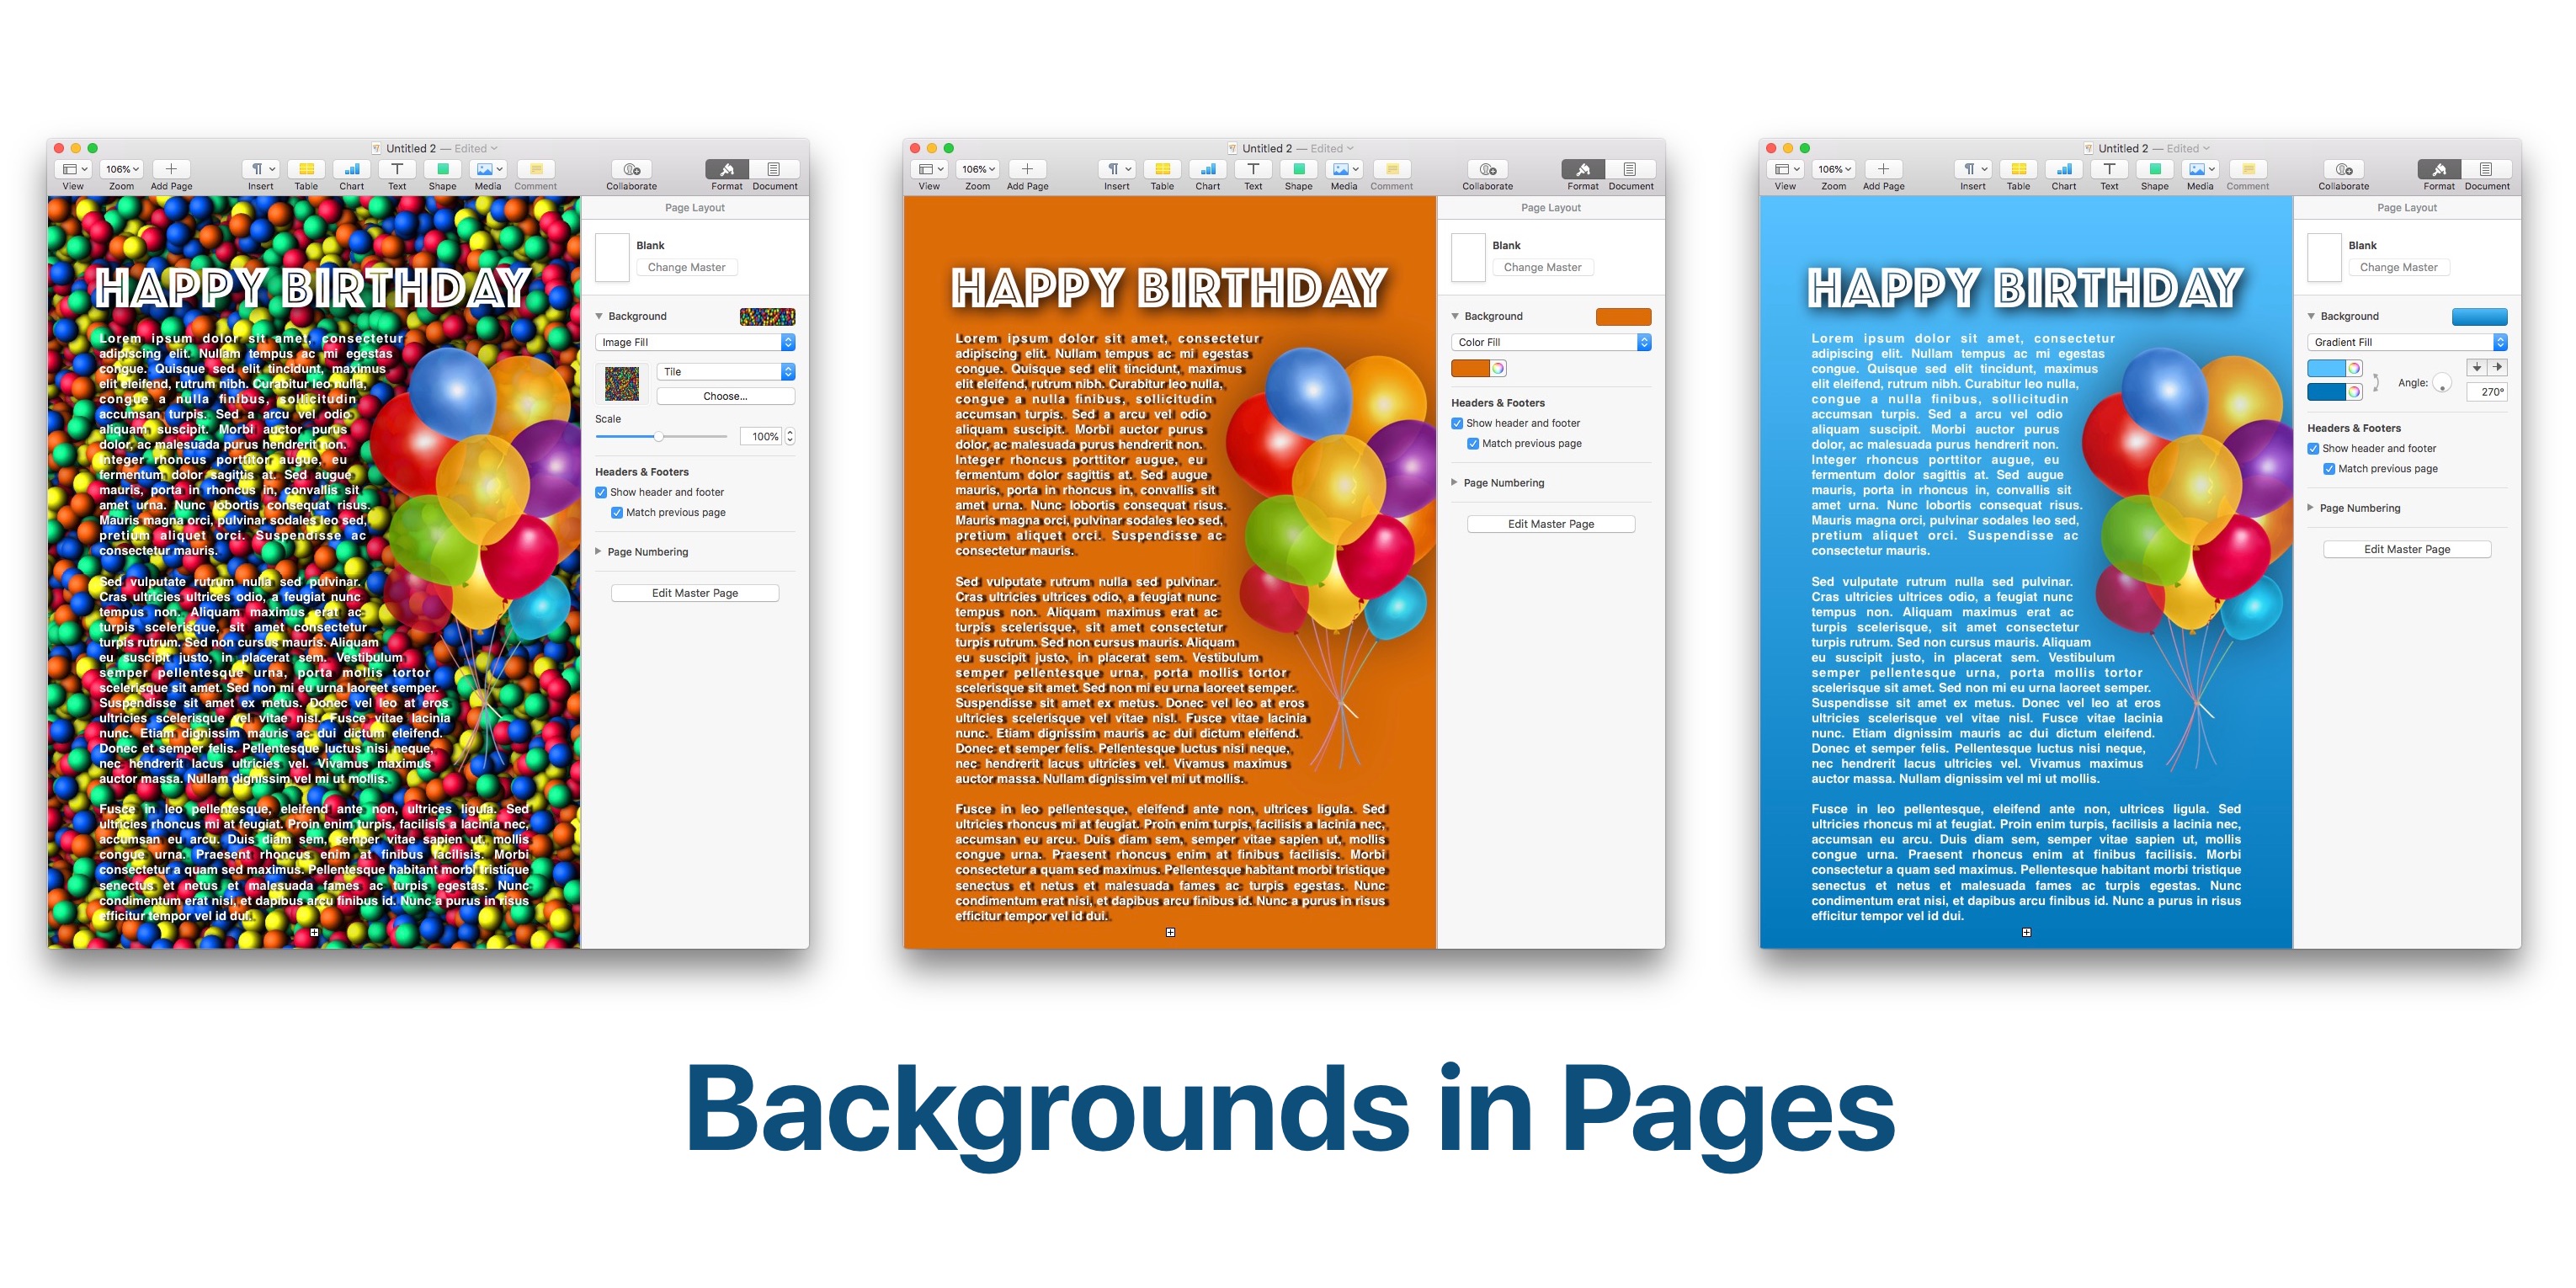 How to change background color in Pages   20to20Mac